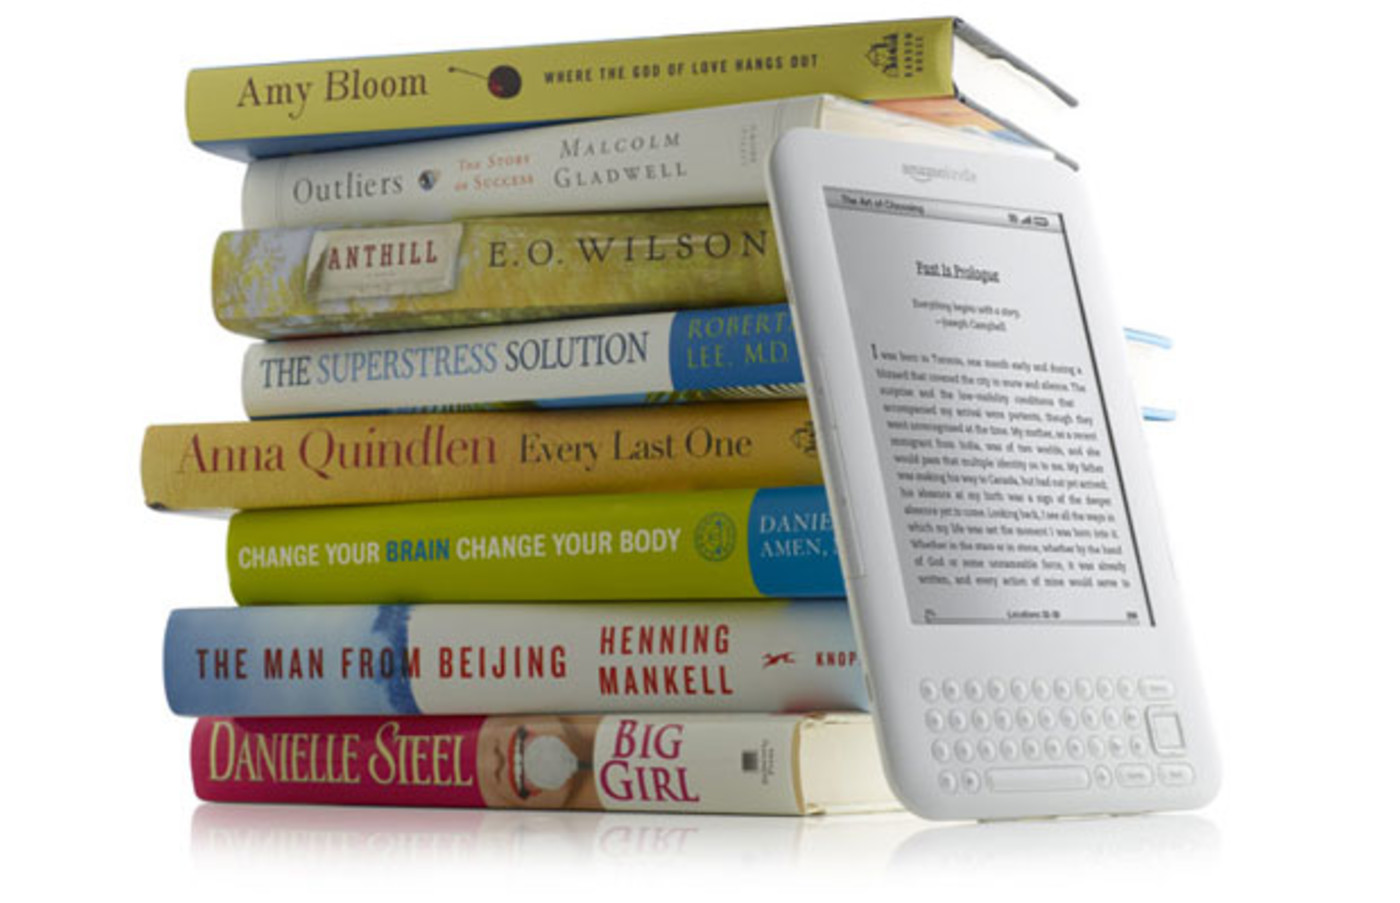 view my kindle library online